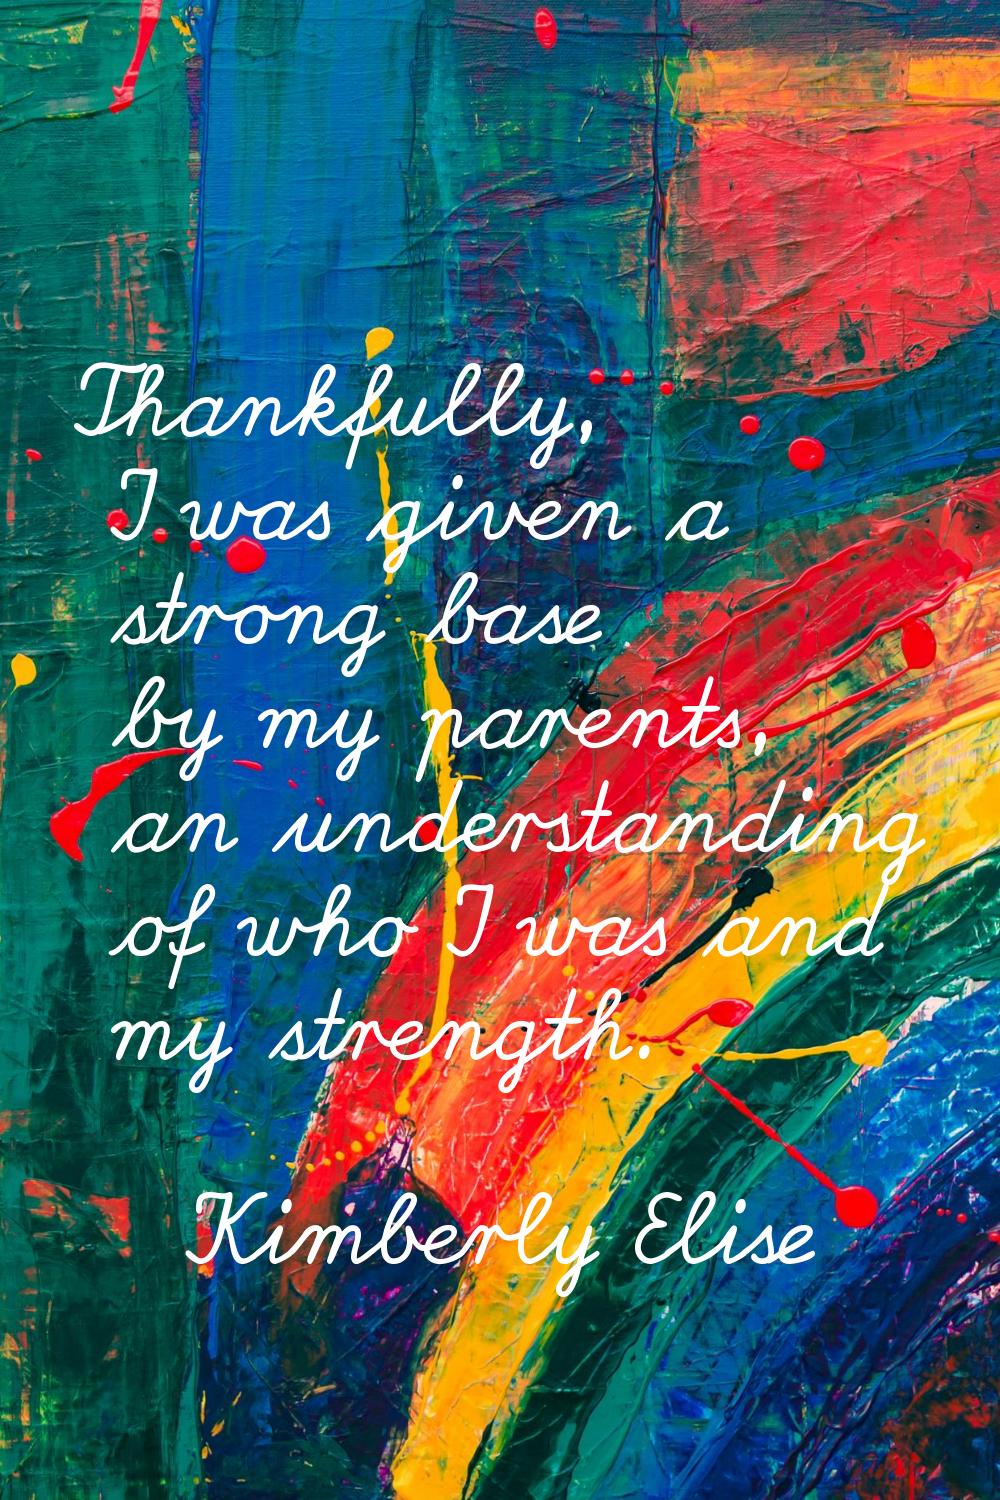 Thankfully, I was given a strong base by my parents, an understanding of who I was and my strength.